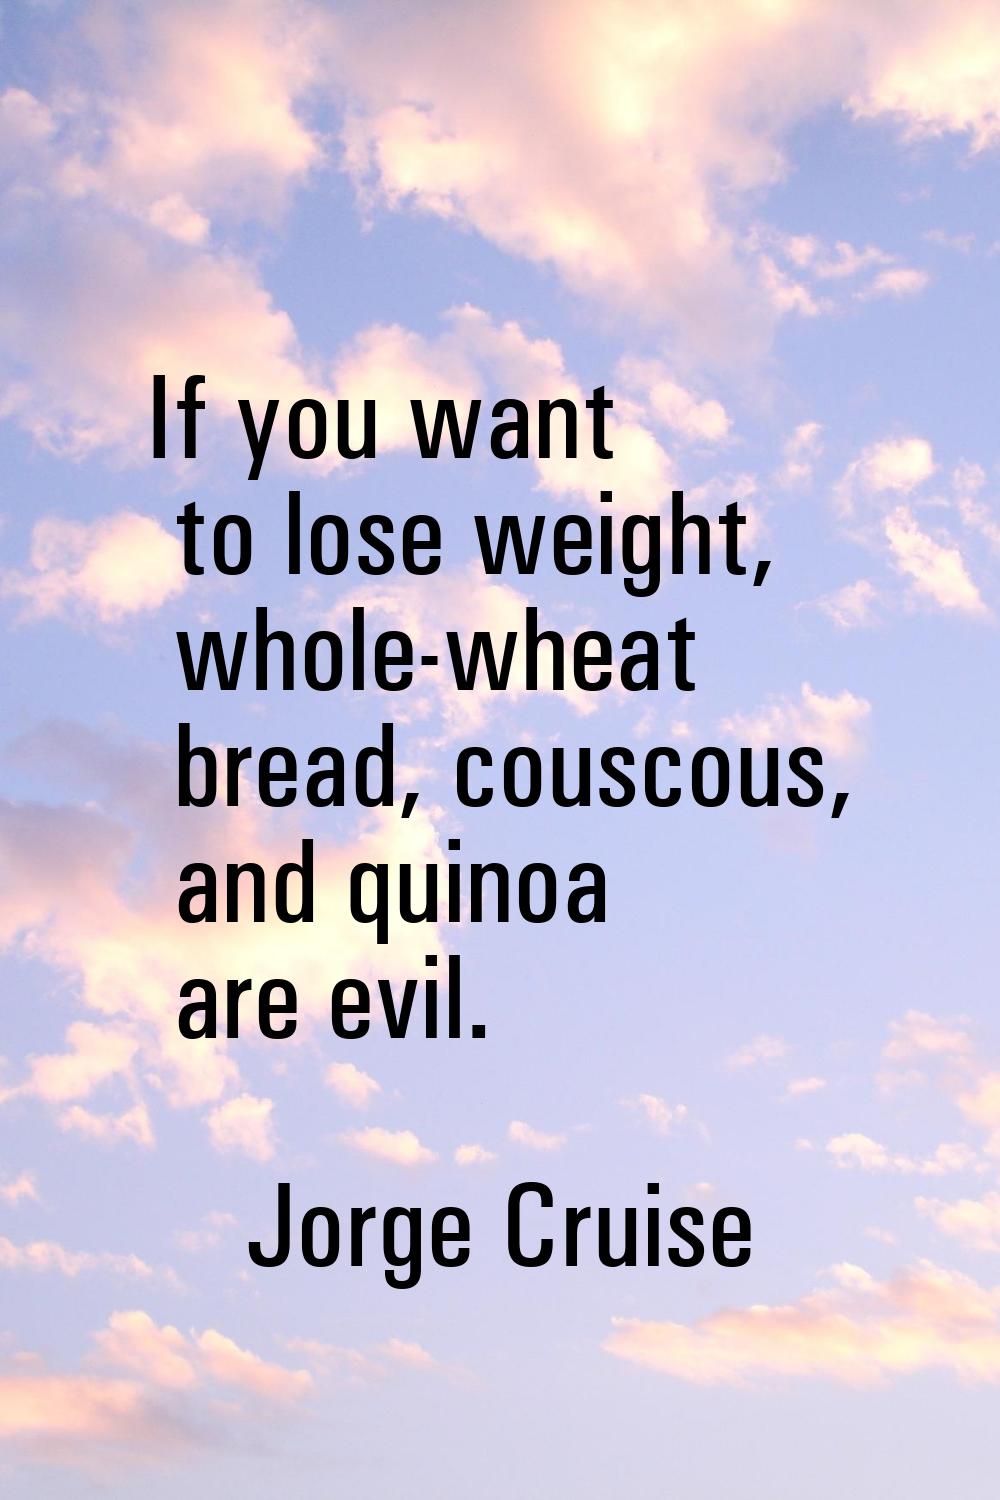 If you want to lose weight, whole-wheat bread, couscous, and quinoa are evil.